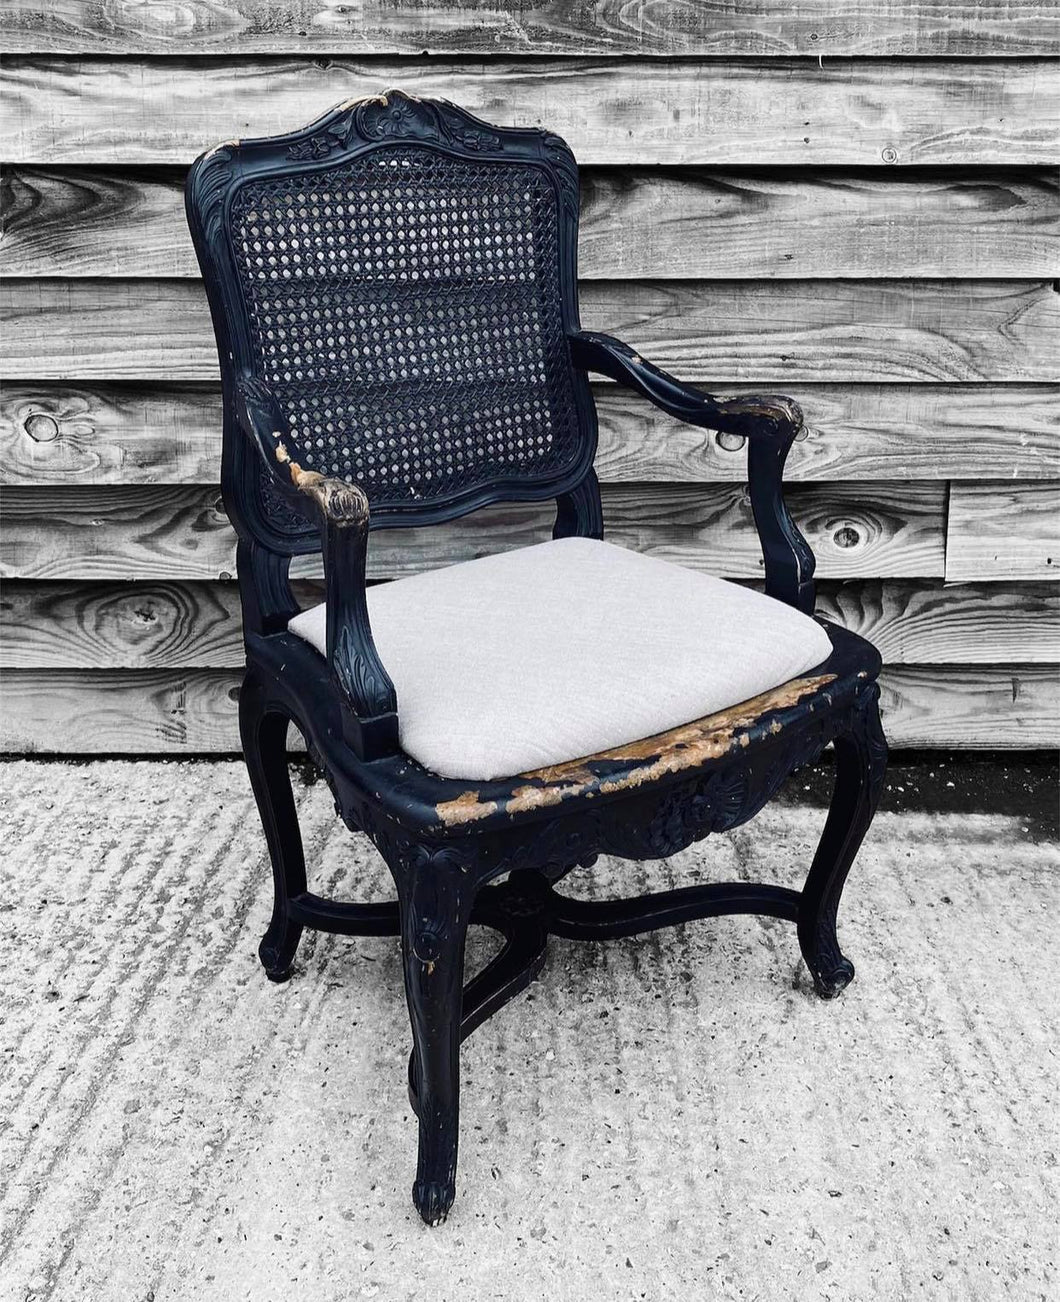 ANTIQUE 20TH CENTURY FRENCH CAQNED & UPHOLSTERED CARVER CHAIR, C1920